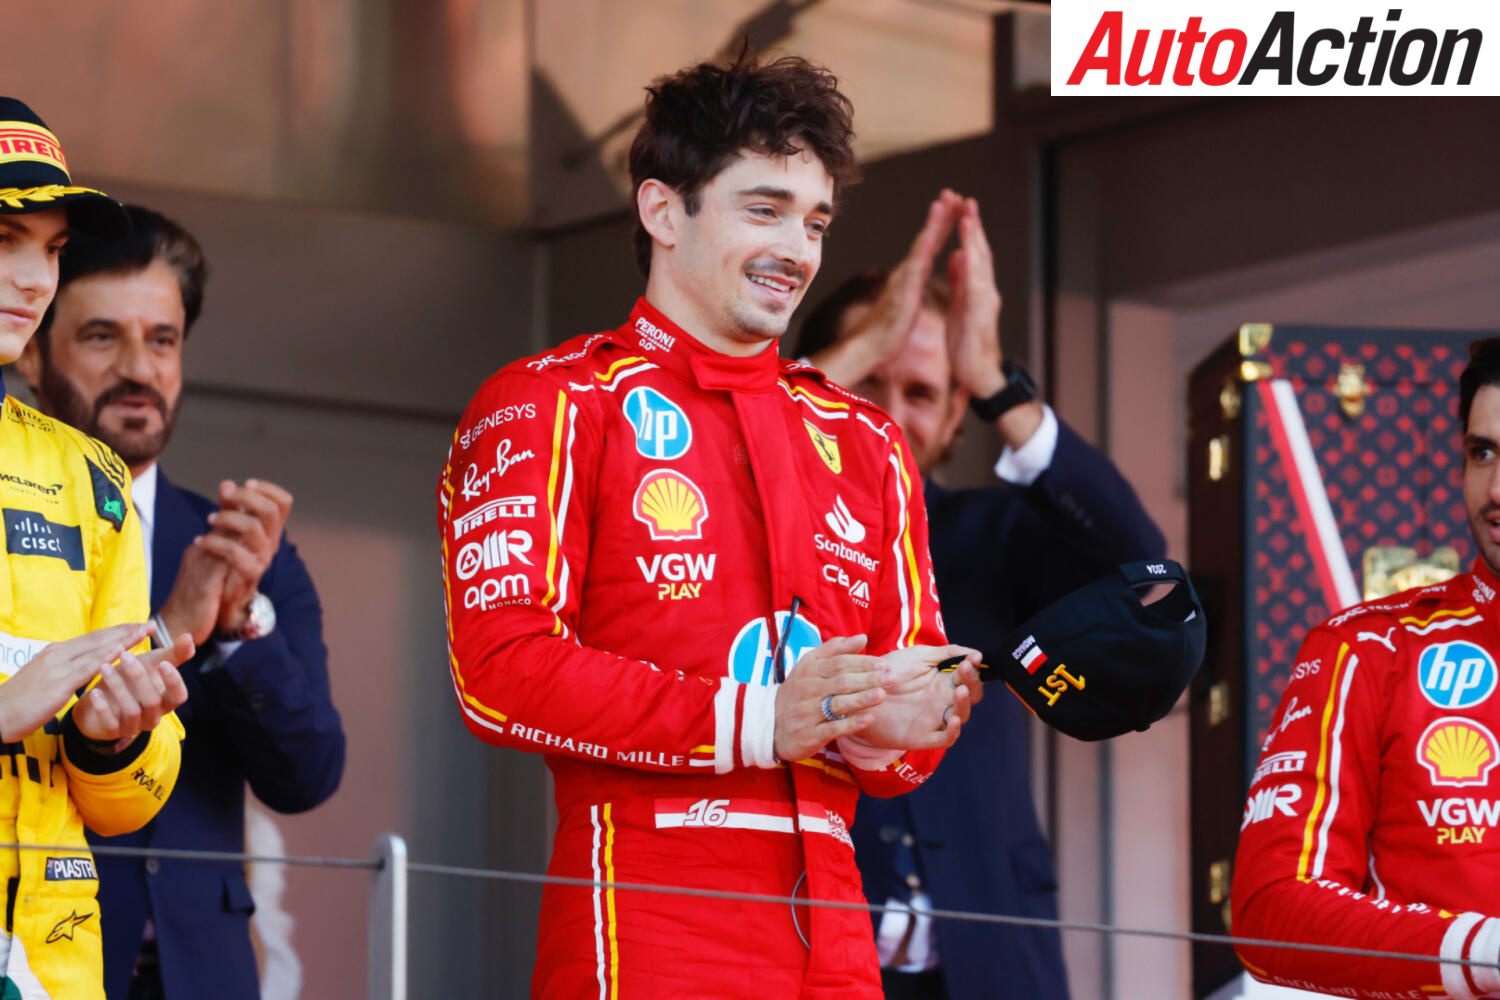 Emotional Leclerc seals long-awaited home victory - Auto Action